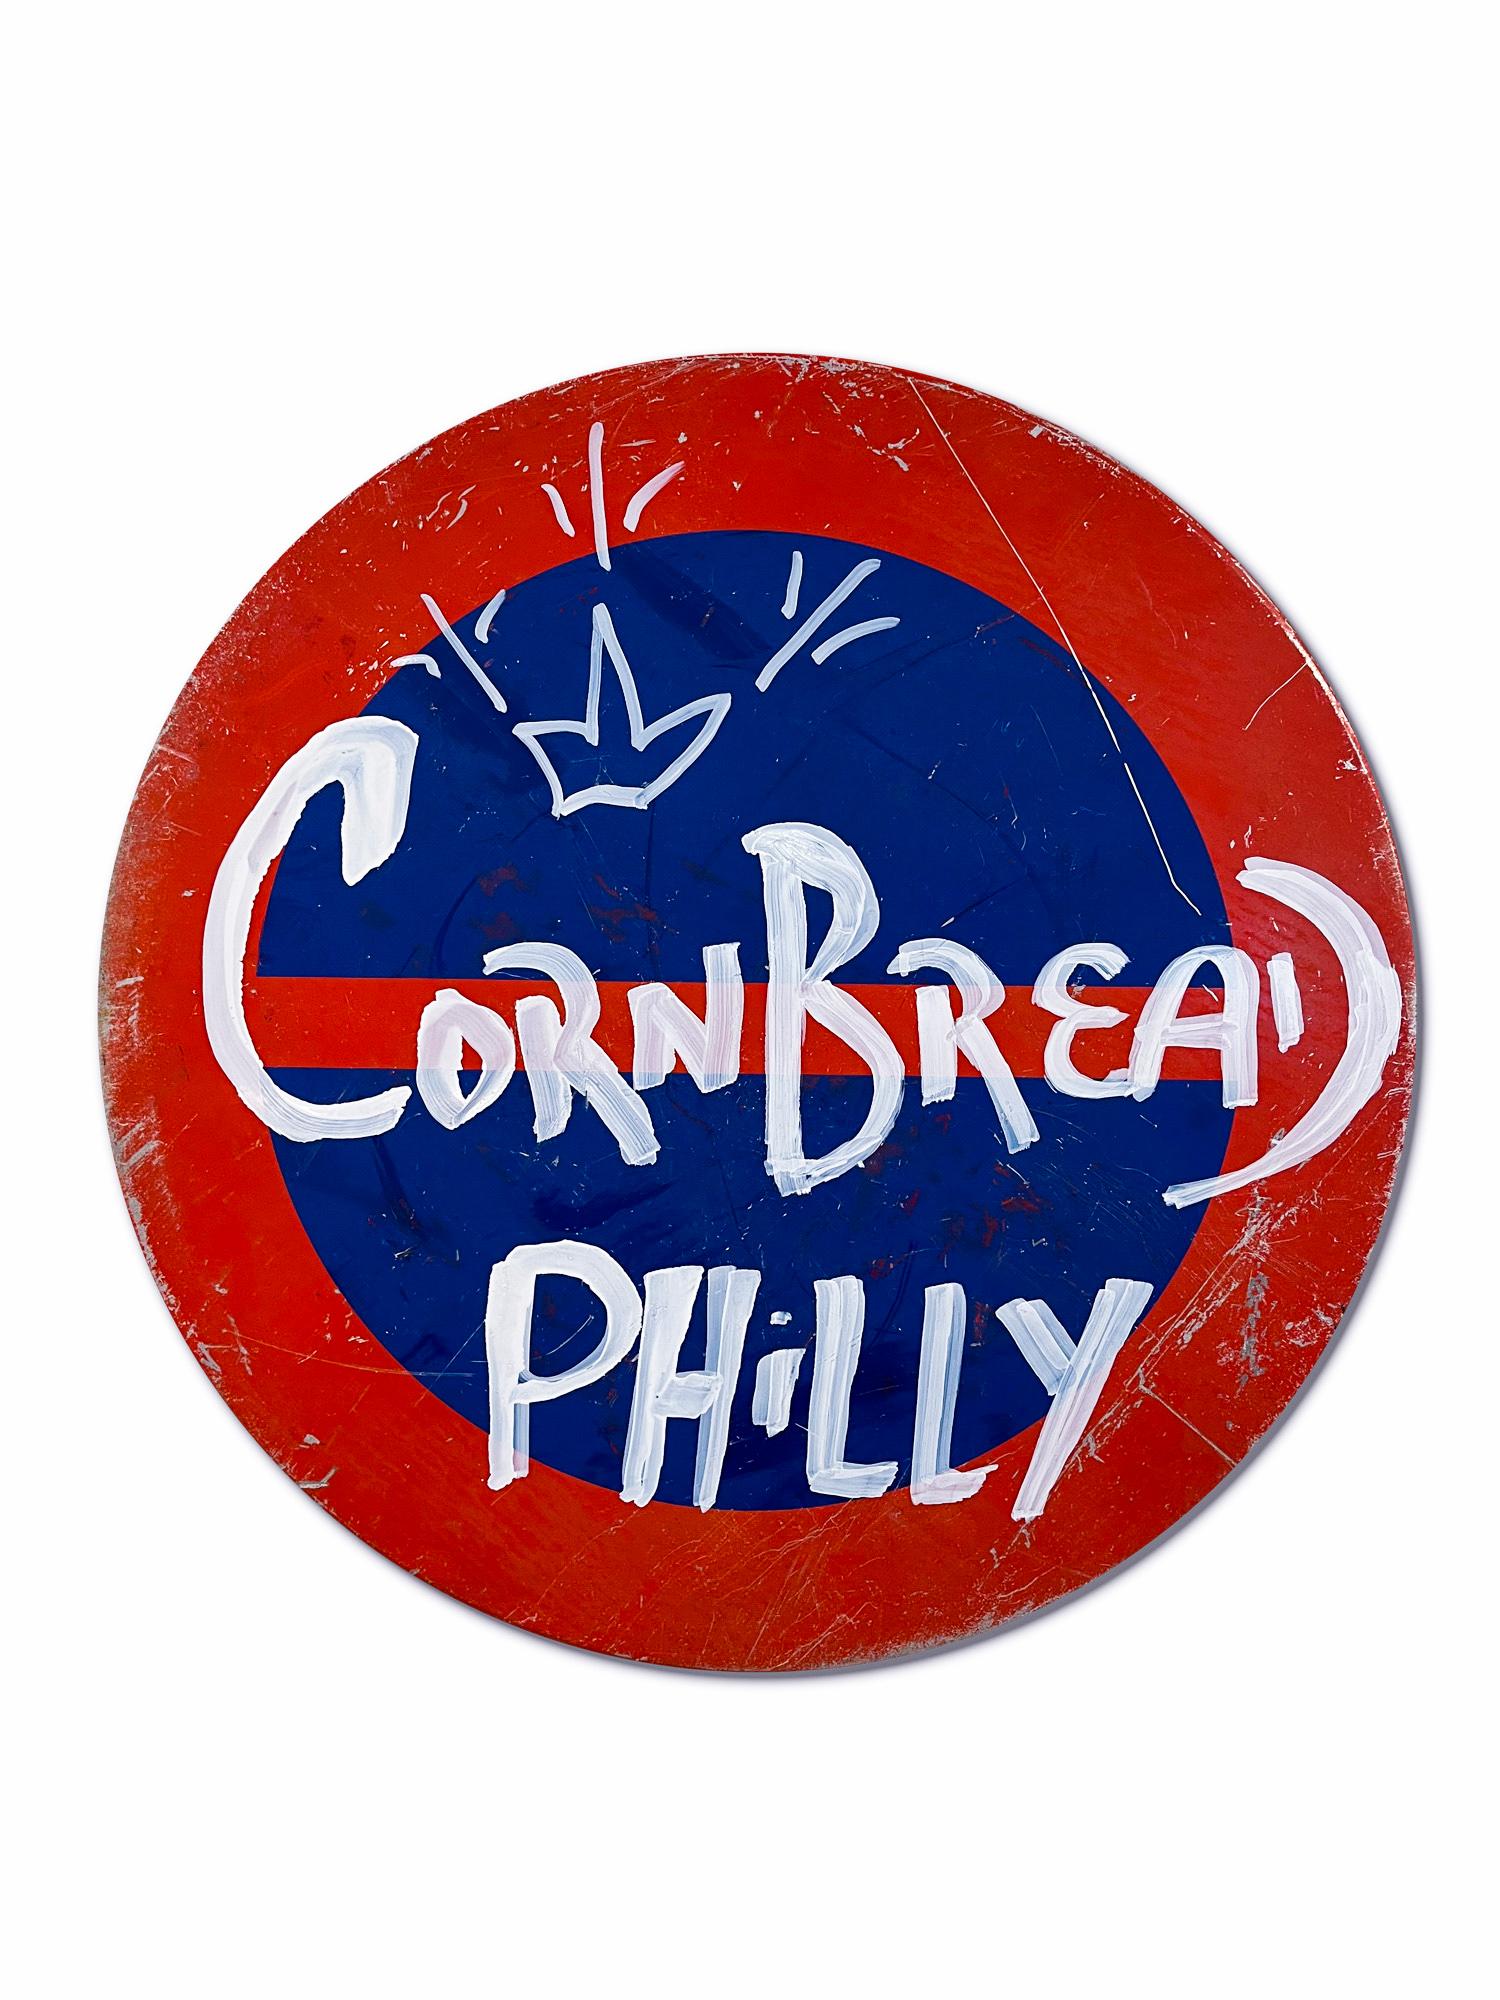 This artwork titled "Cornbread Global Phenomenon Shield" is an original artwork by Cornbread made of acrylic paint on a retired Amsterdam street sign. The piece measures 80cm / 31.5in diameter. 

Darryl McCray, known by his tagging name,